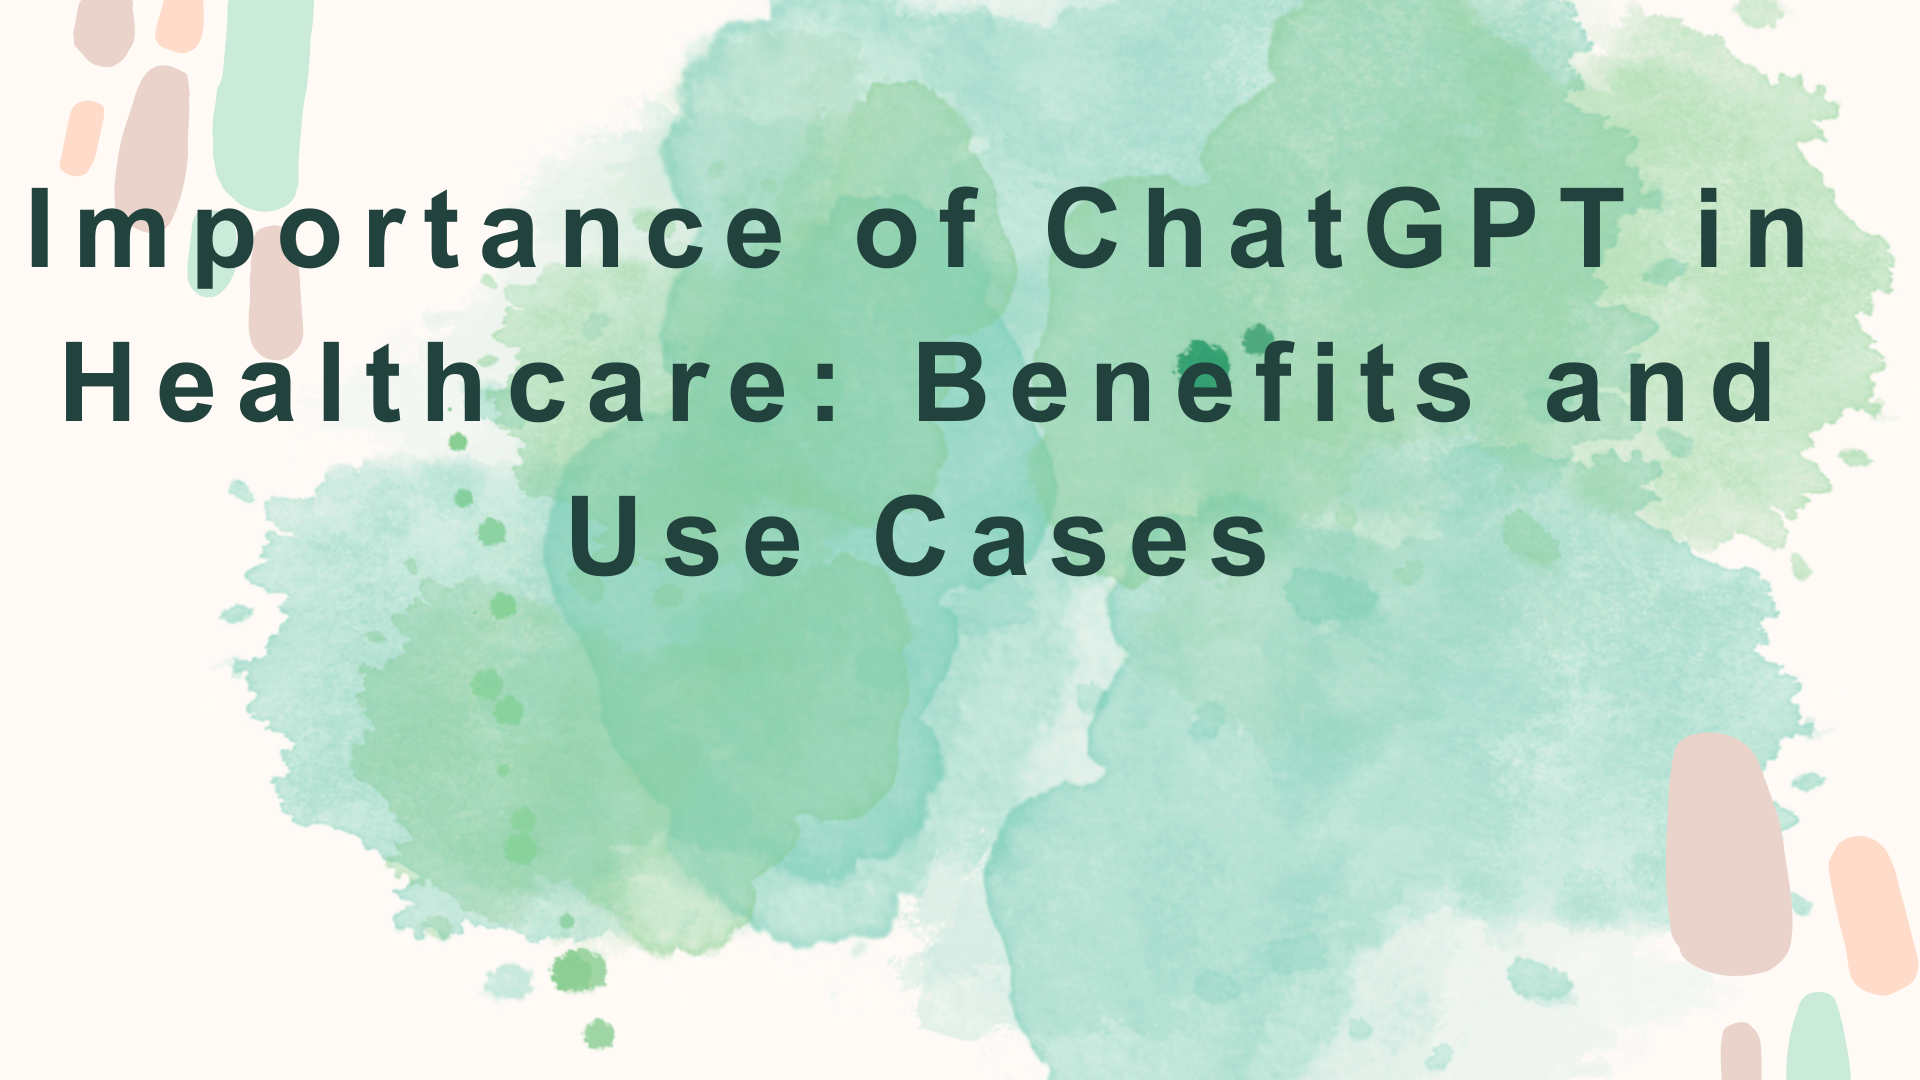 Importance of ChatGPT in Healthcare: Benefits and Use Cases